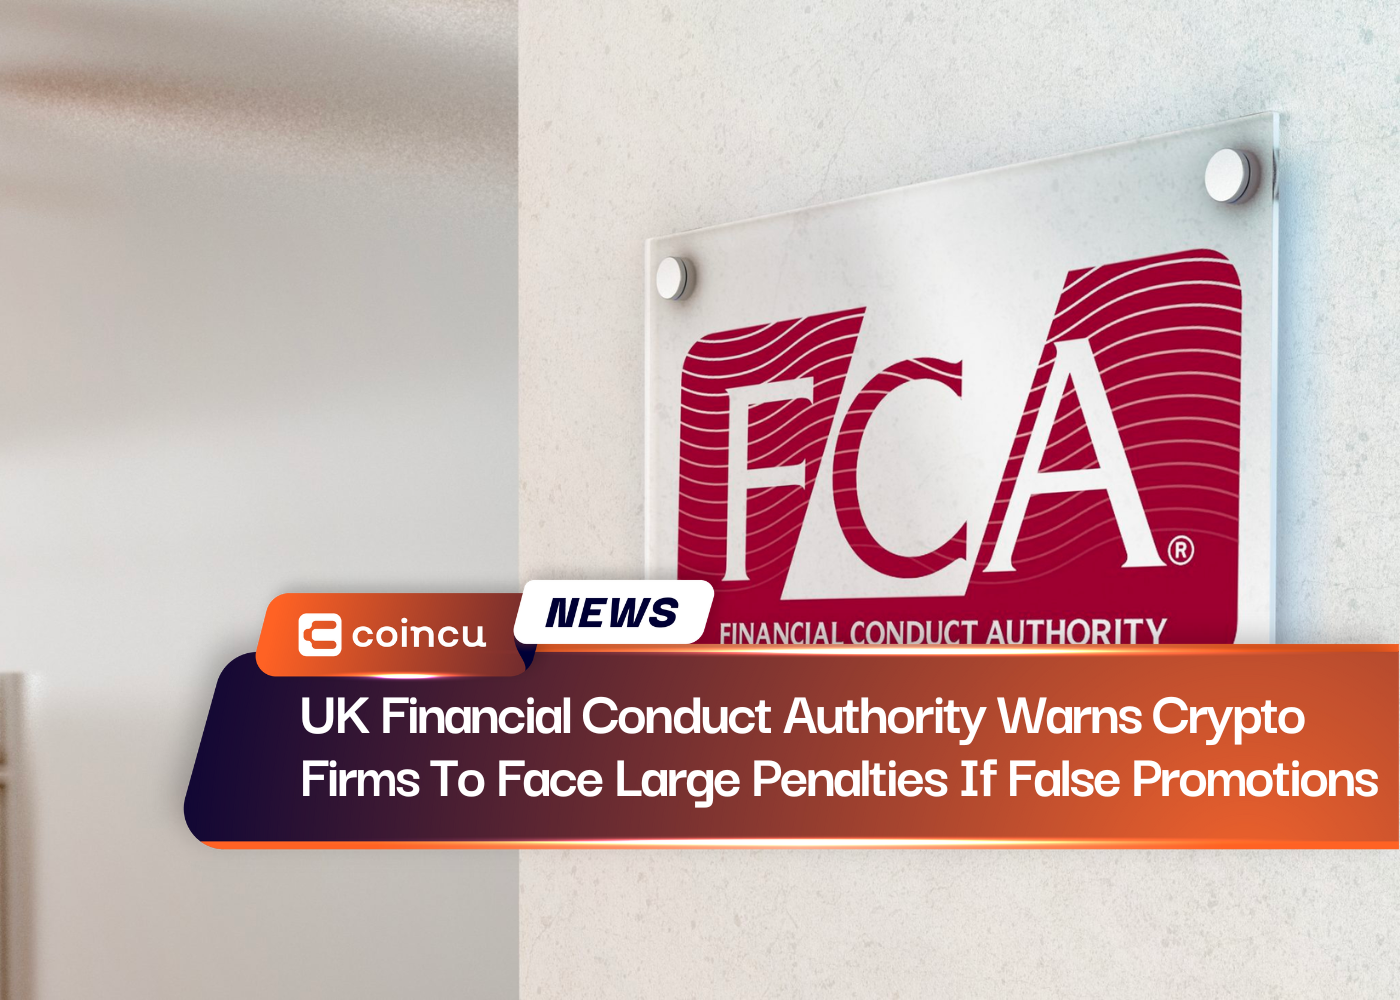 UK Financial Conduct Authority Warns Crypto Firms To Face Large Penalties If False Promotions